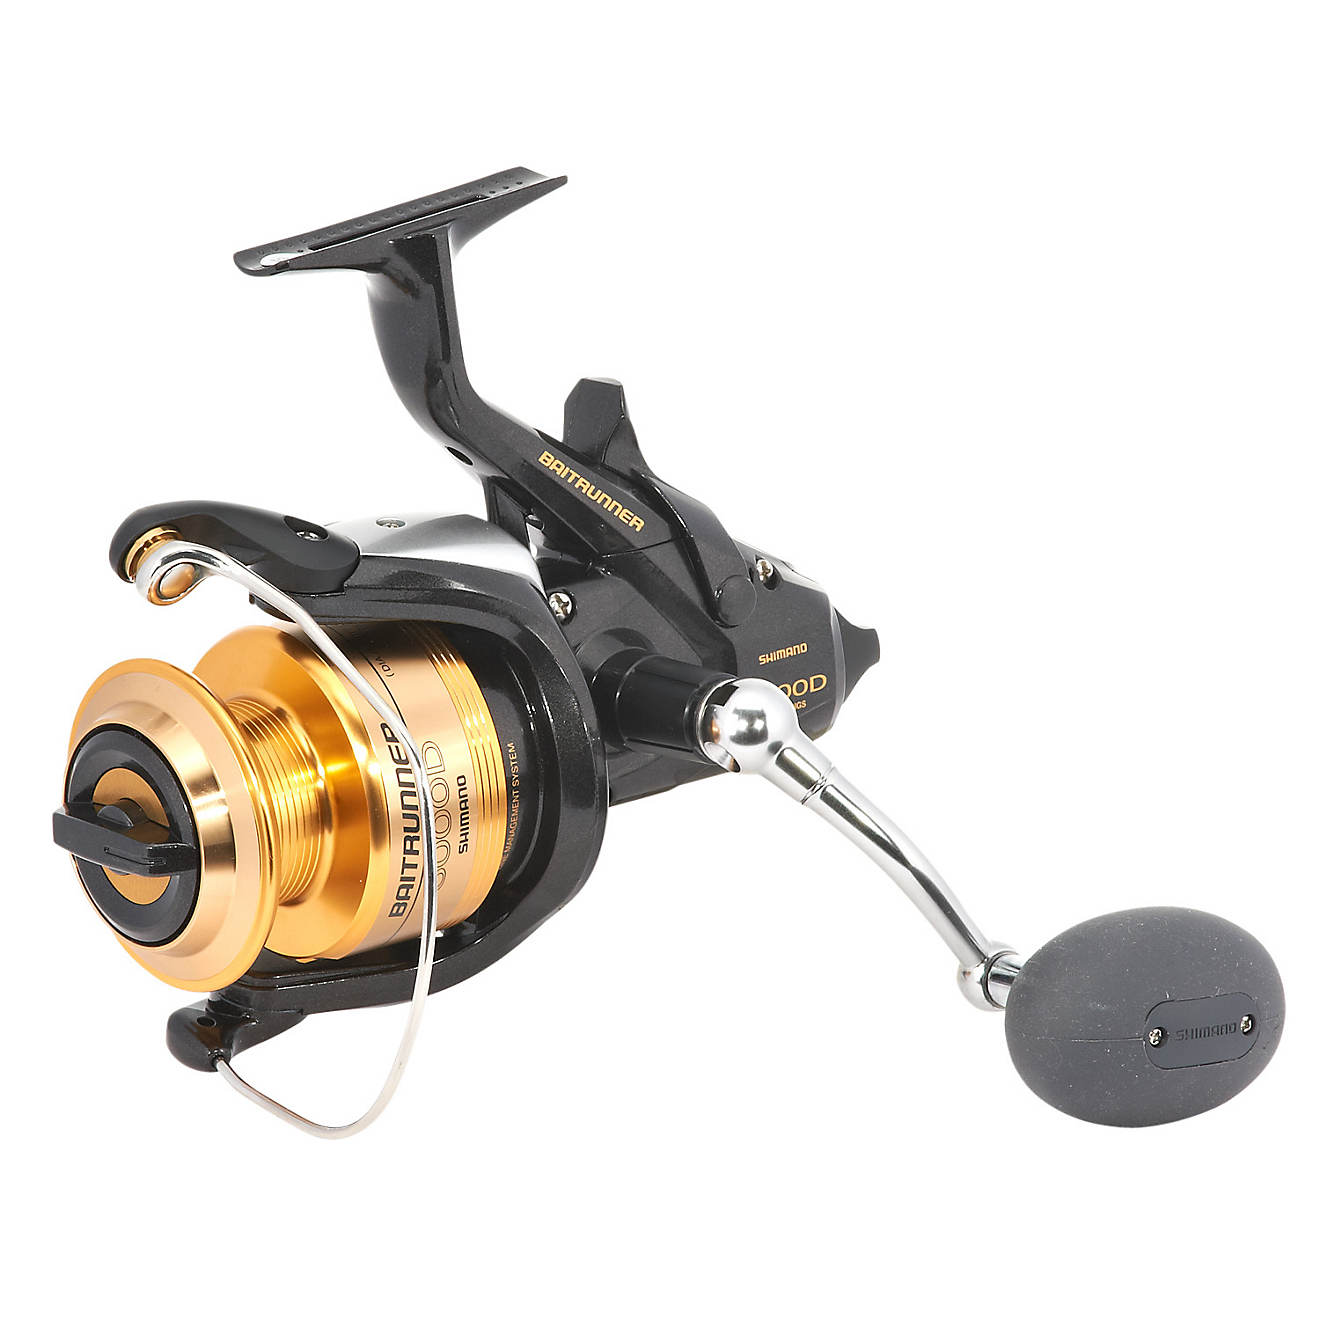 Shimano North America Fishing - THROWBACK THURSDAY: Oh, the Baitrunner!  This was a Shimano original innovation. It allowed anglers to fish a spinning  reel in free-spool with the bail closed. A small